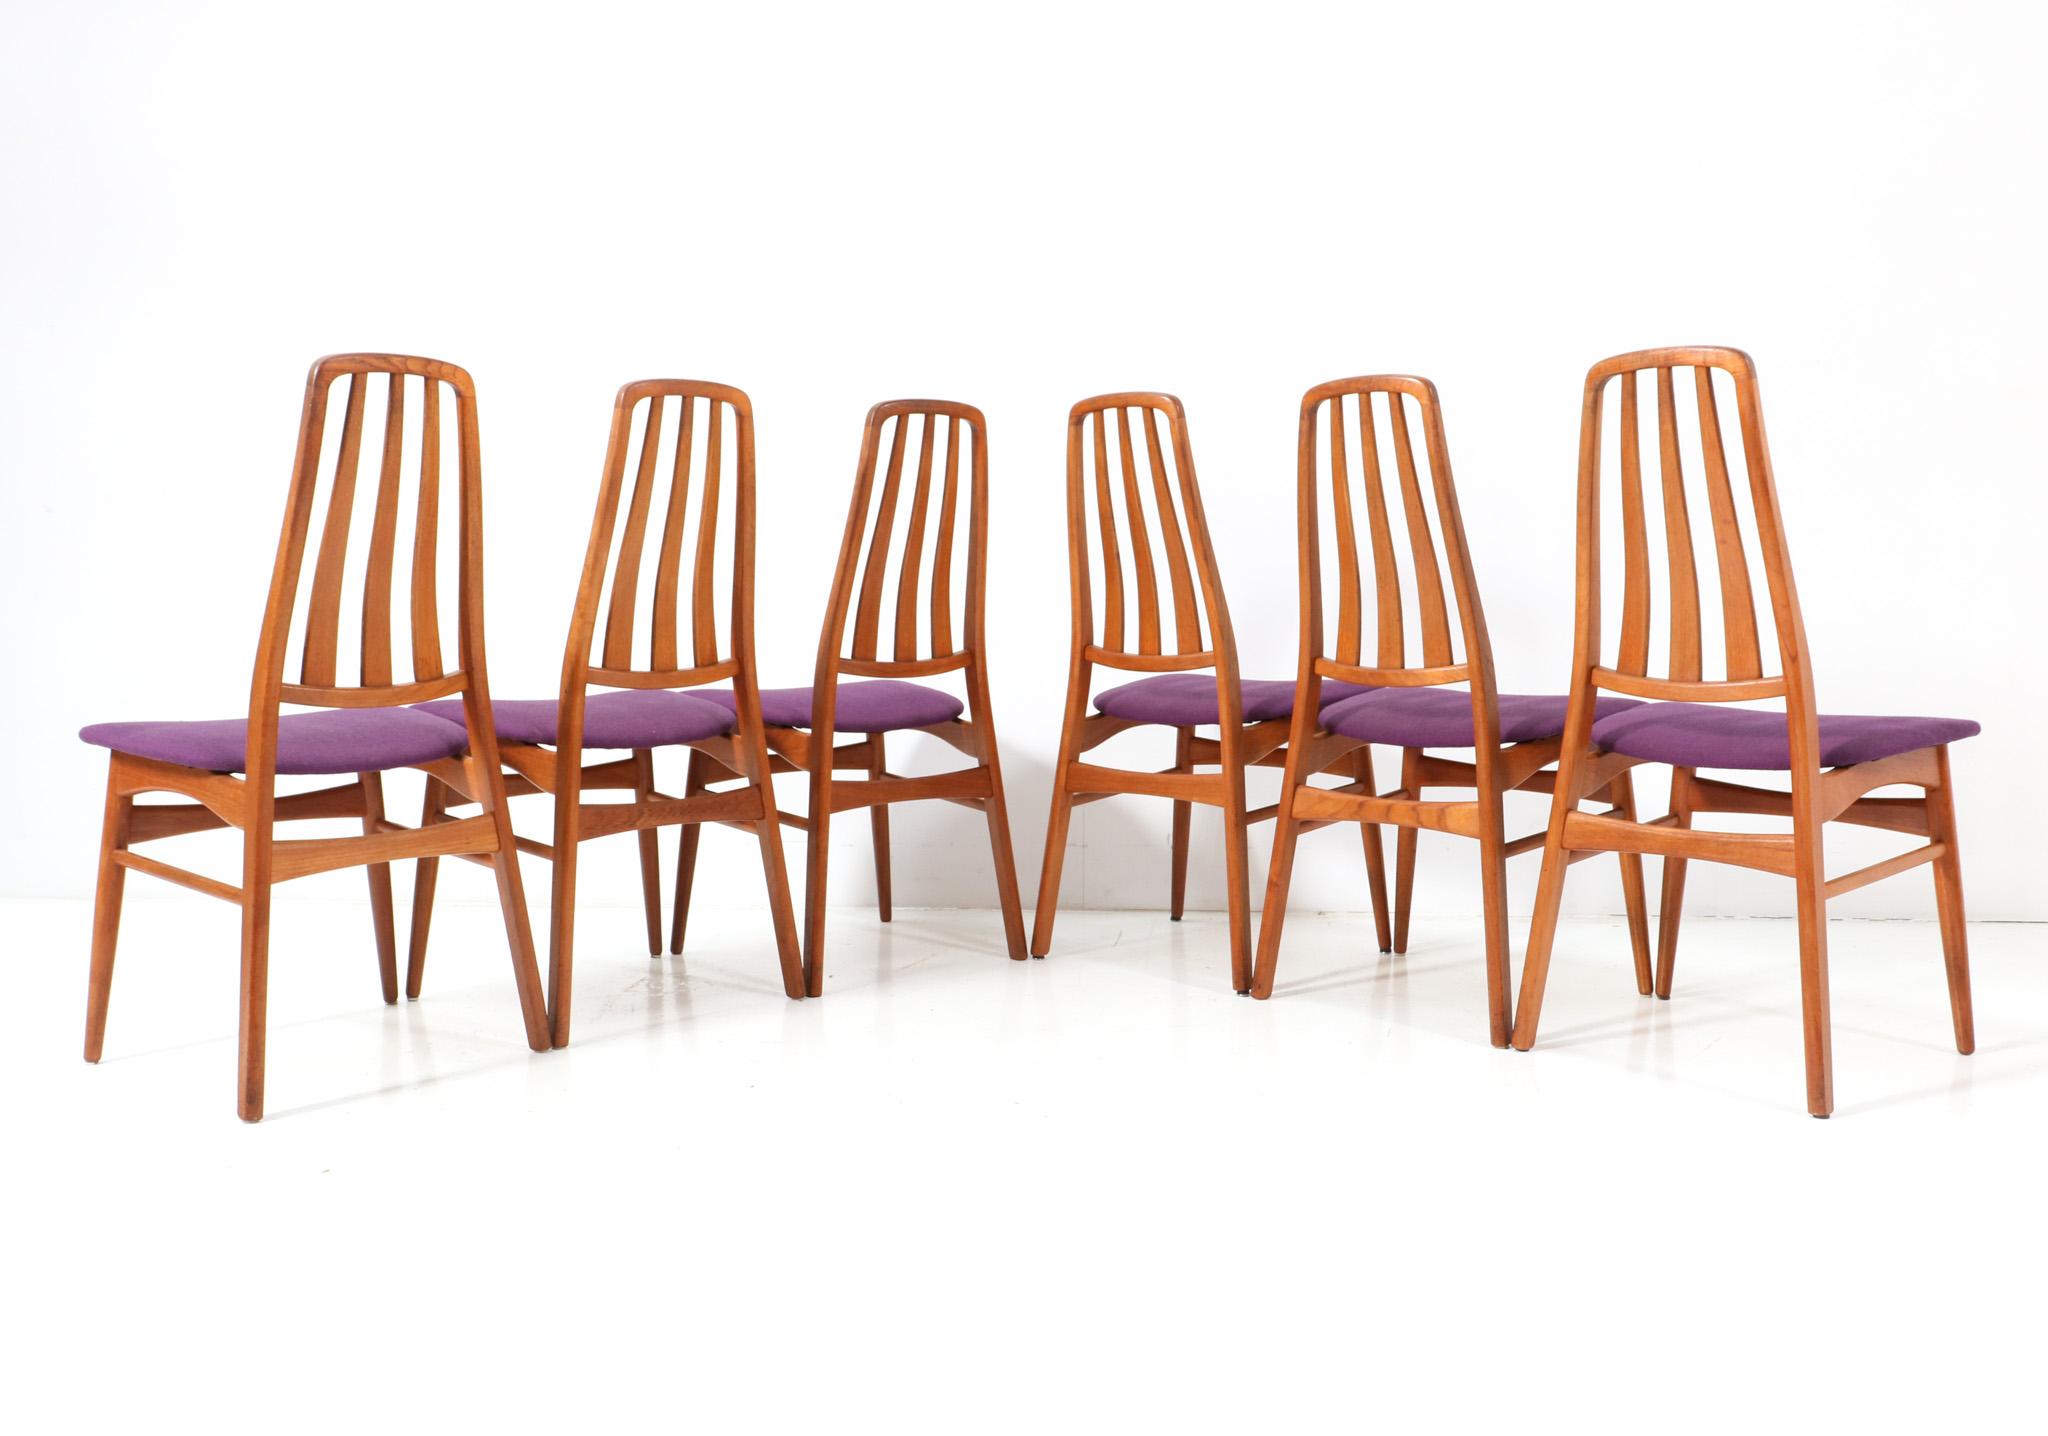 Six Teak Mid-Century Modern Dining Room Chairs, 1960s In Good Condition For Sale In Amsterdam, NL